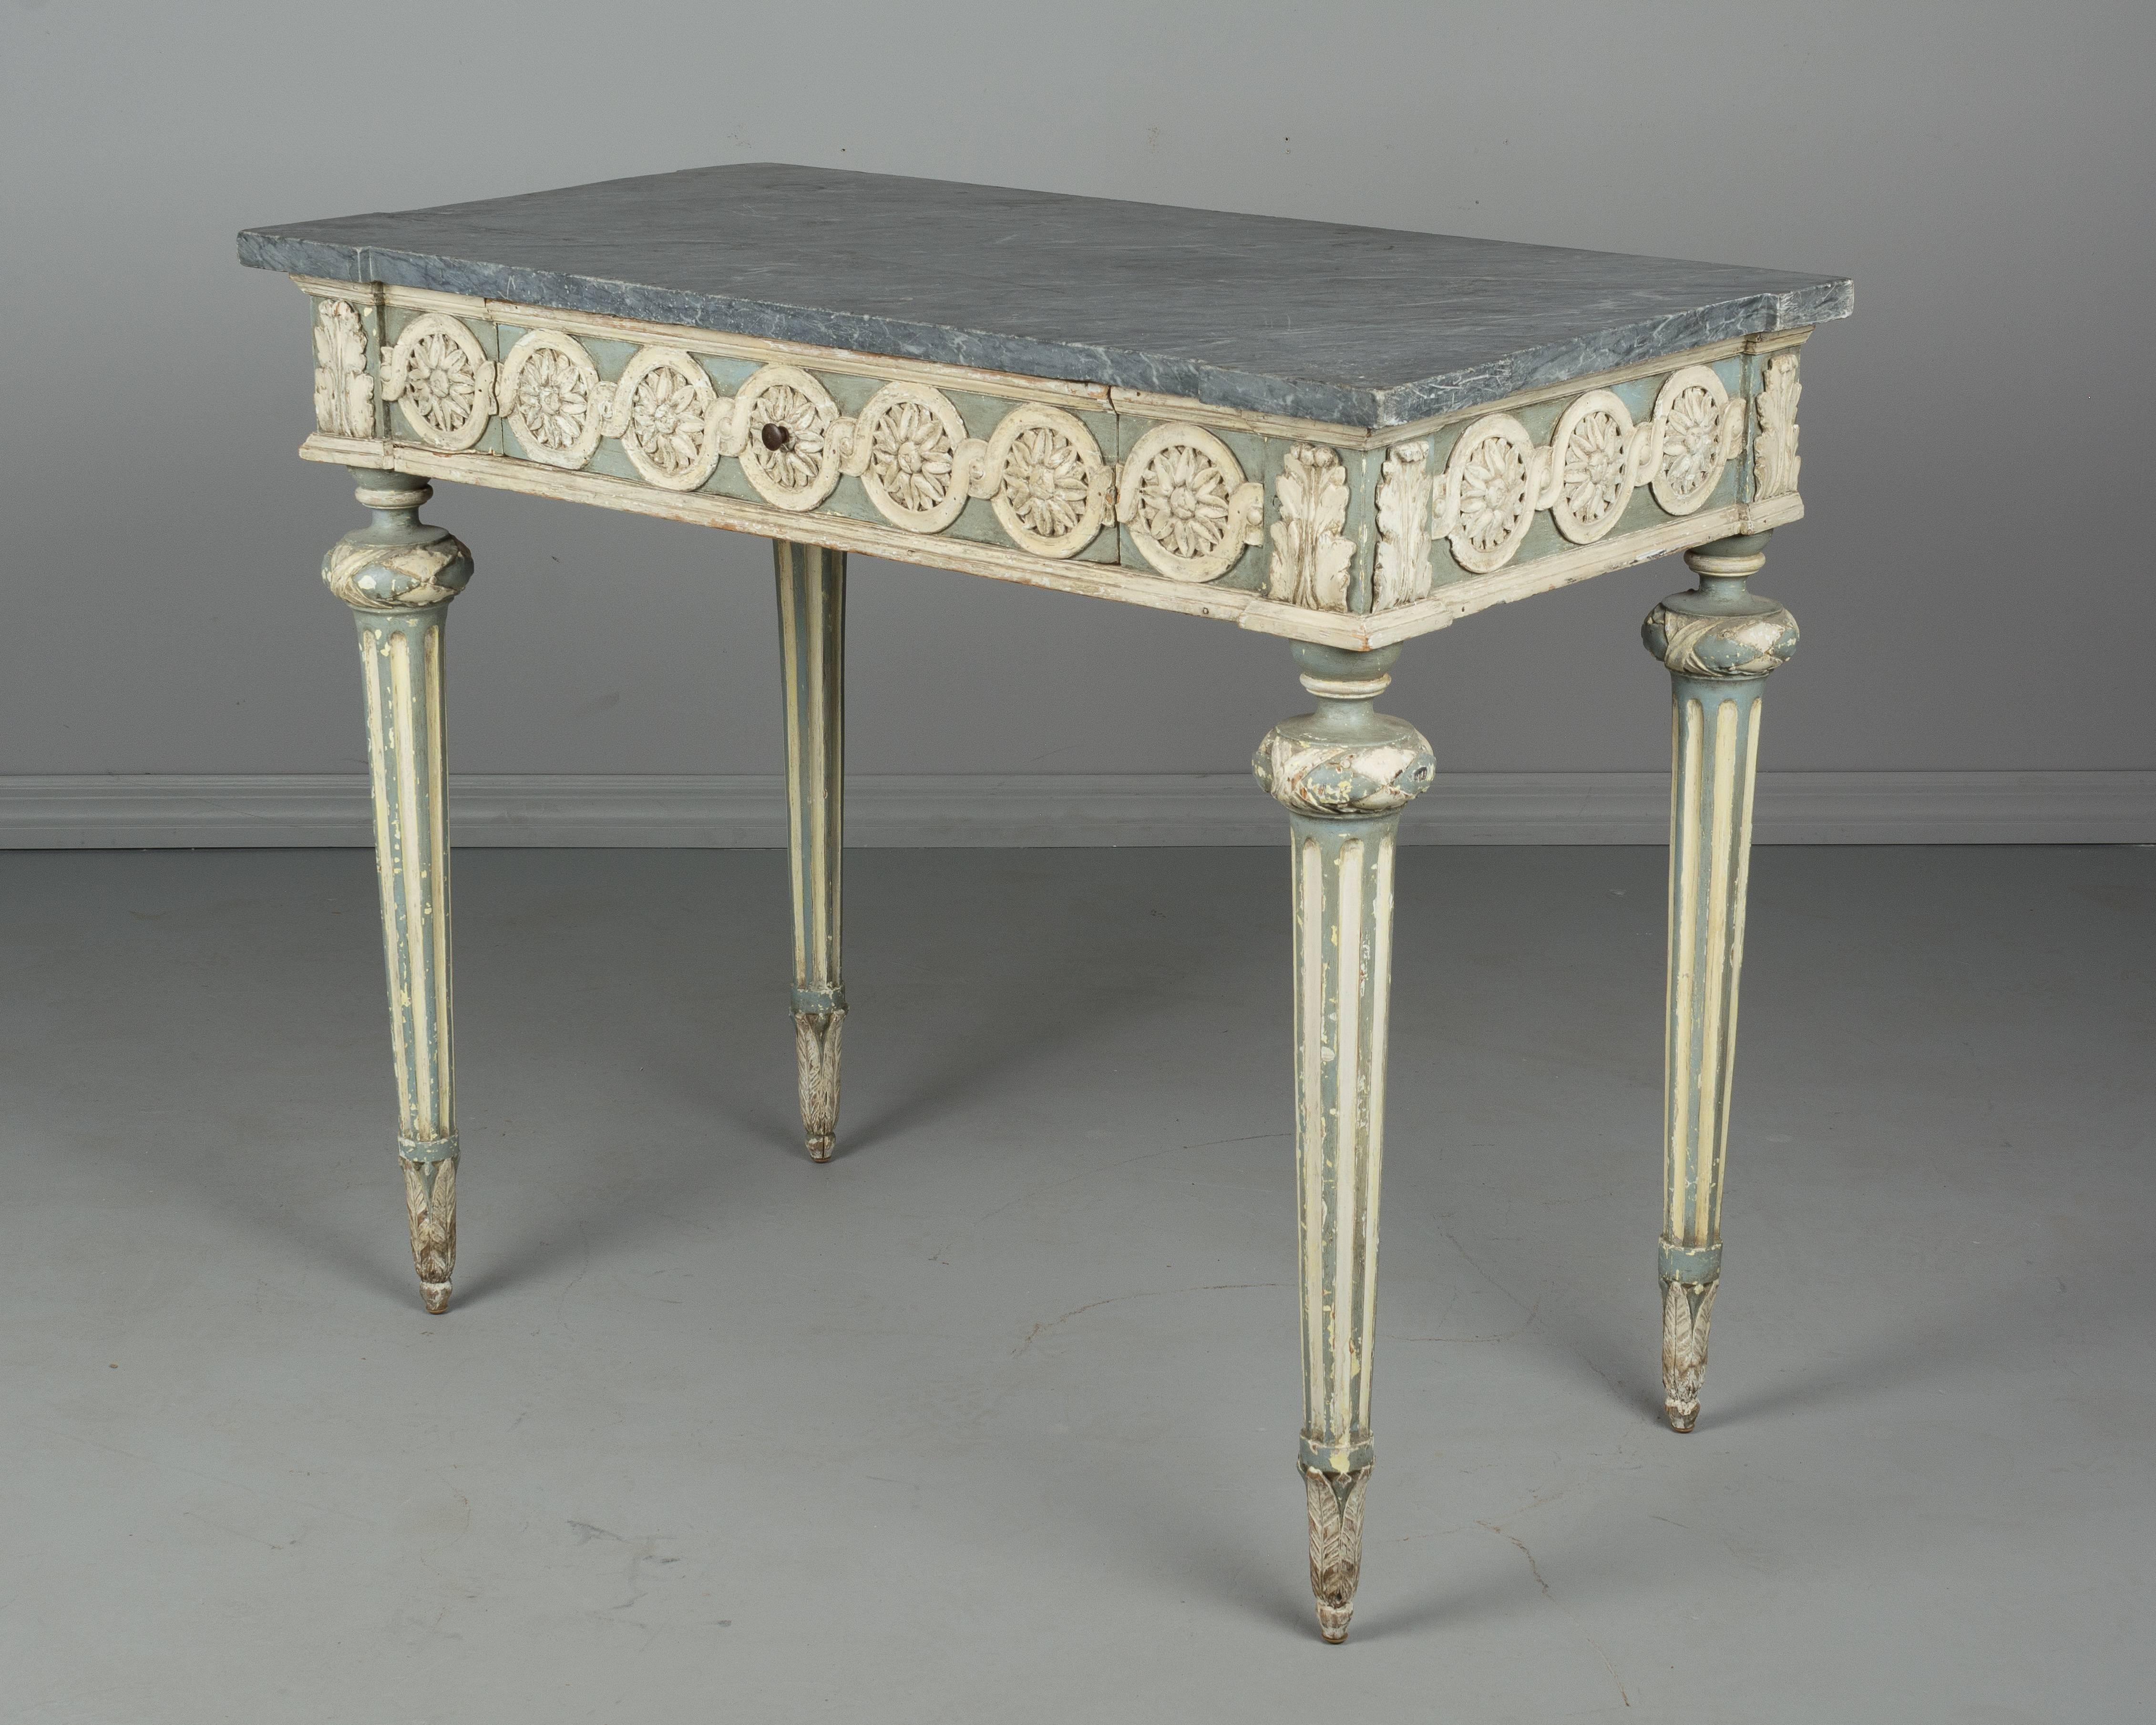 A 19th century French Louis XVI Provençal console made of pine with original pale Verdigris and cream painted finish. Hand-carved decoration and turned fluted legs. Single dovetailed drawer. Original grey marble top with notched corners. Please